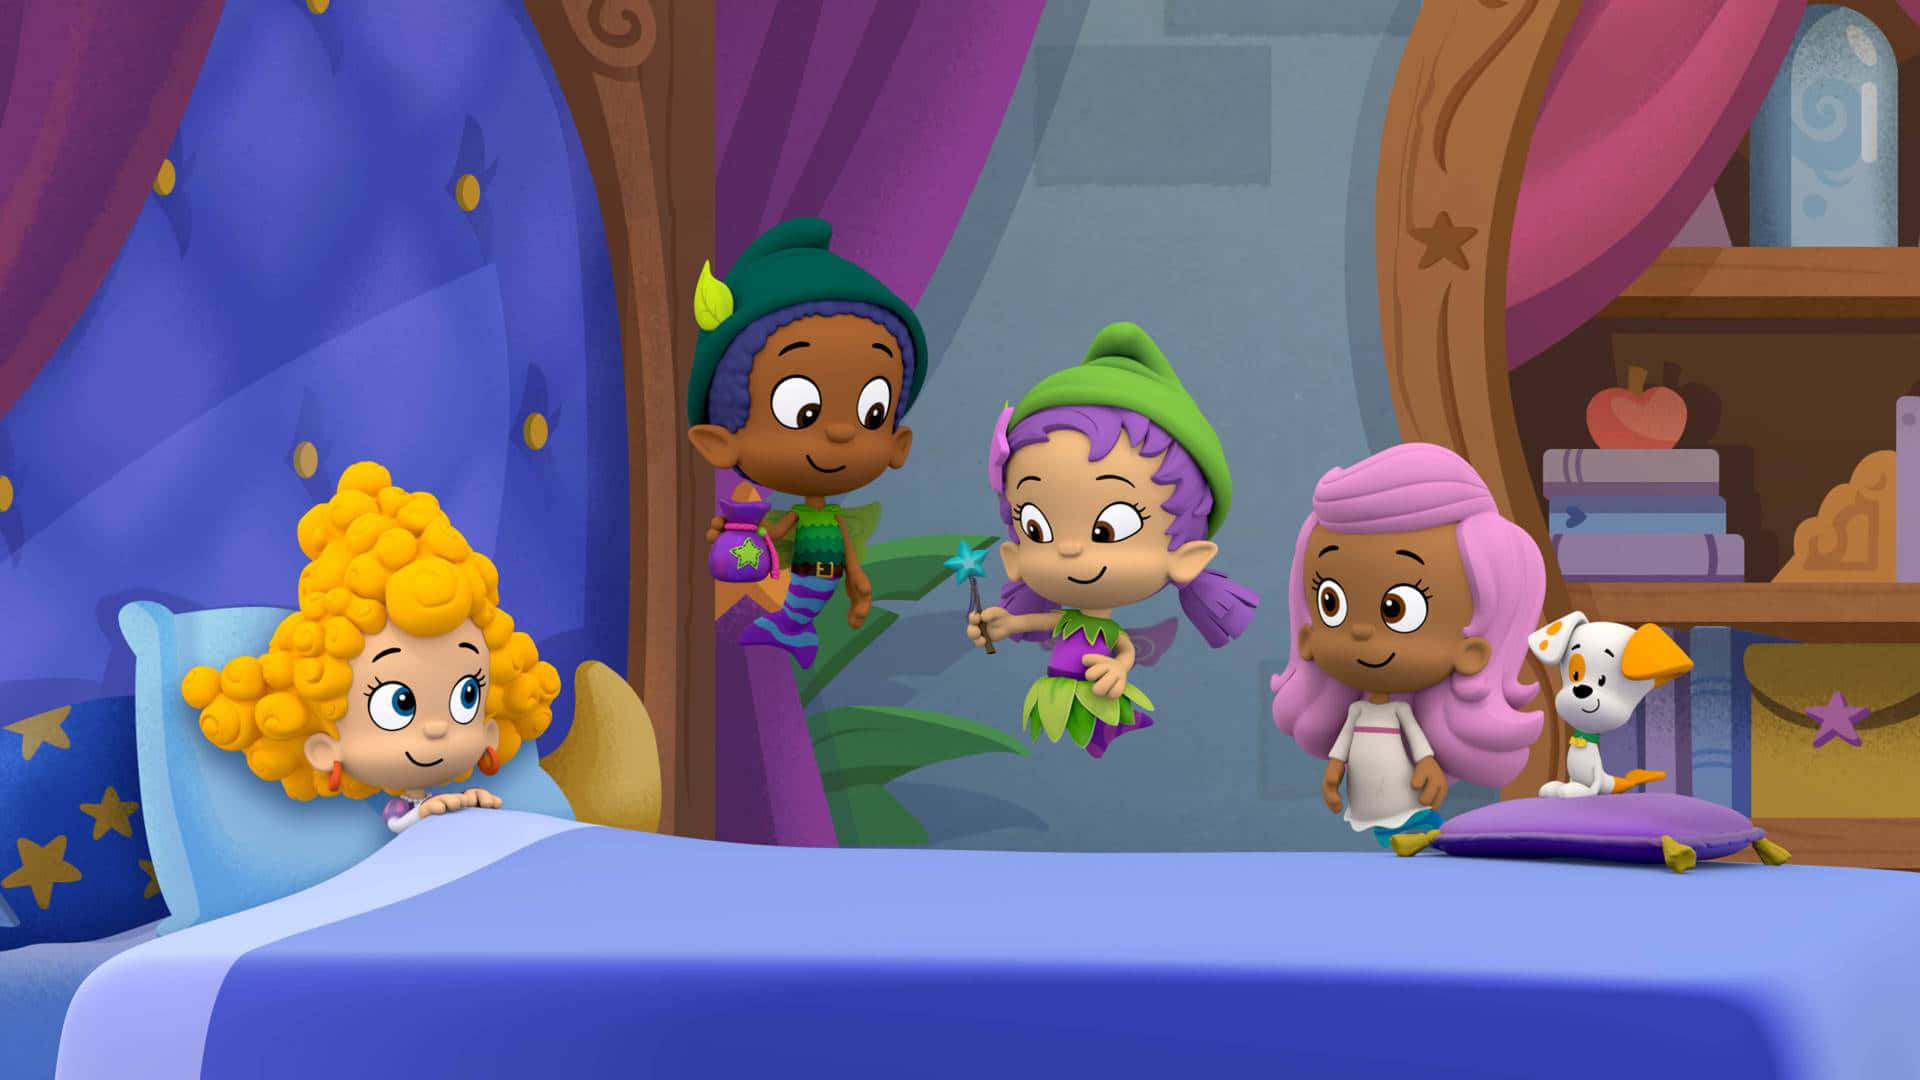 Join Bubble Guppies on a fun and colorful underwater adventure!